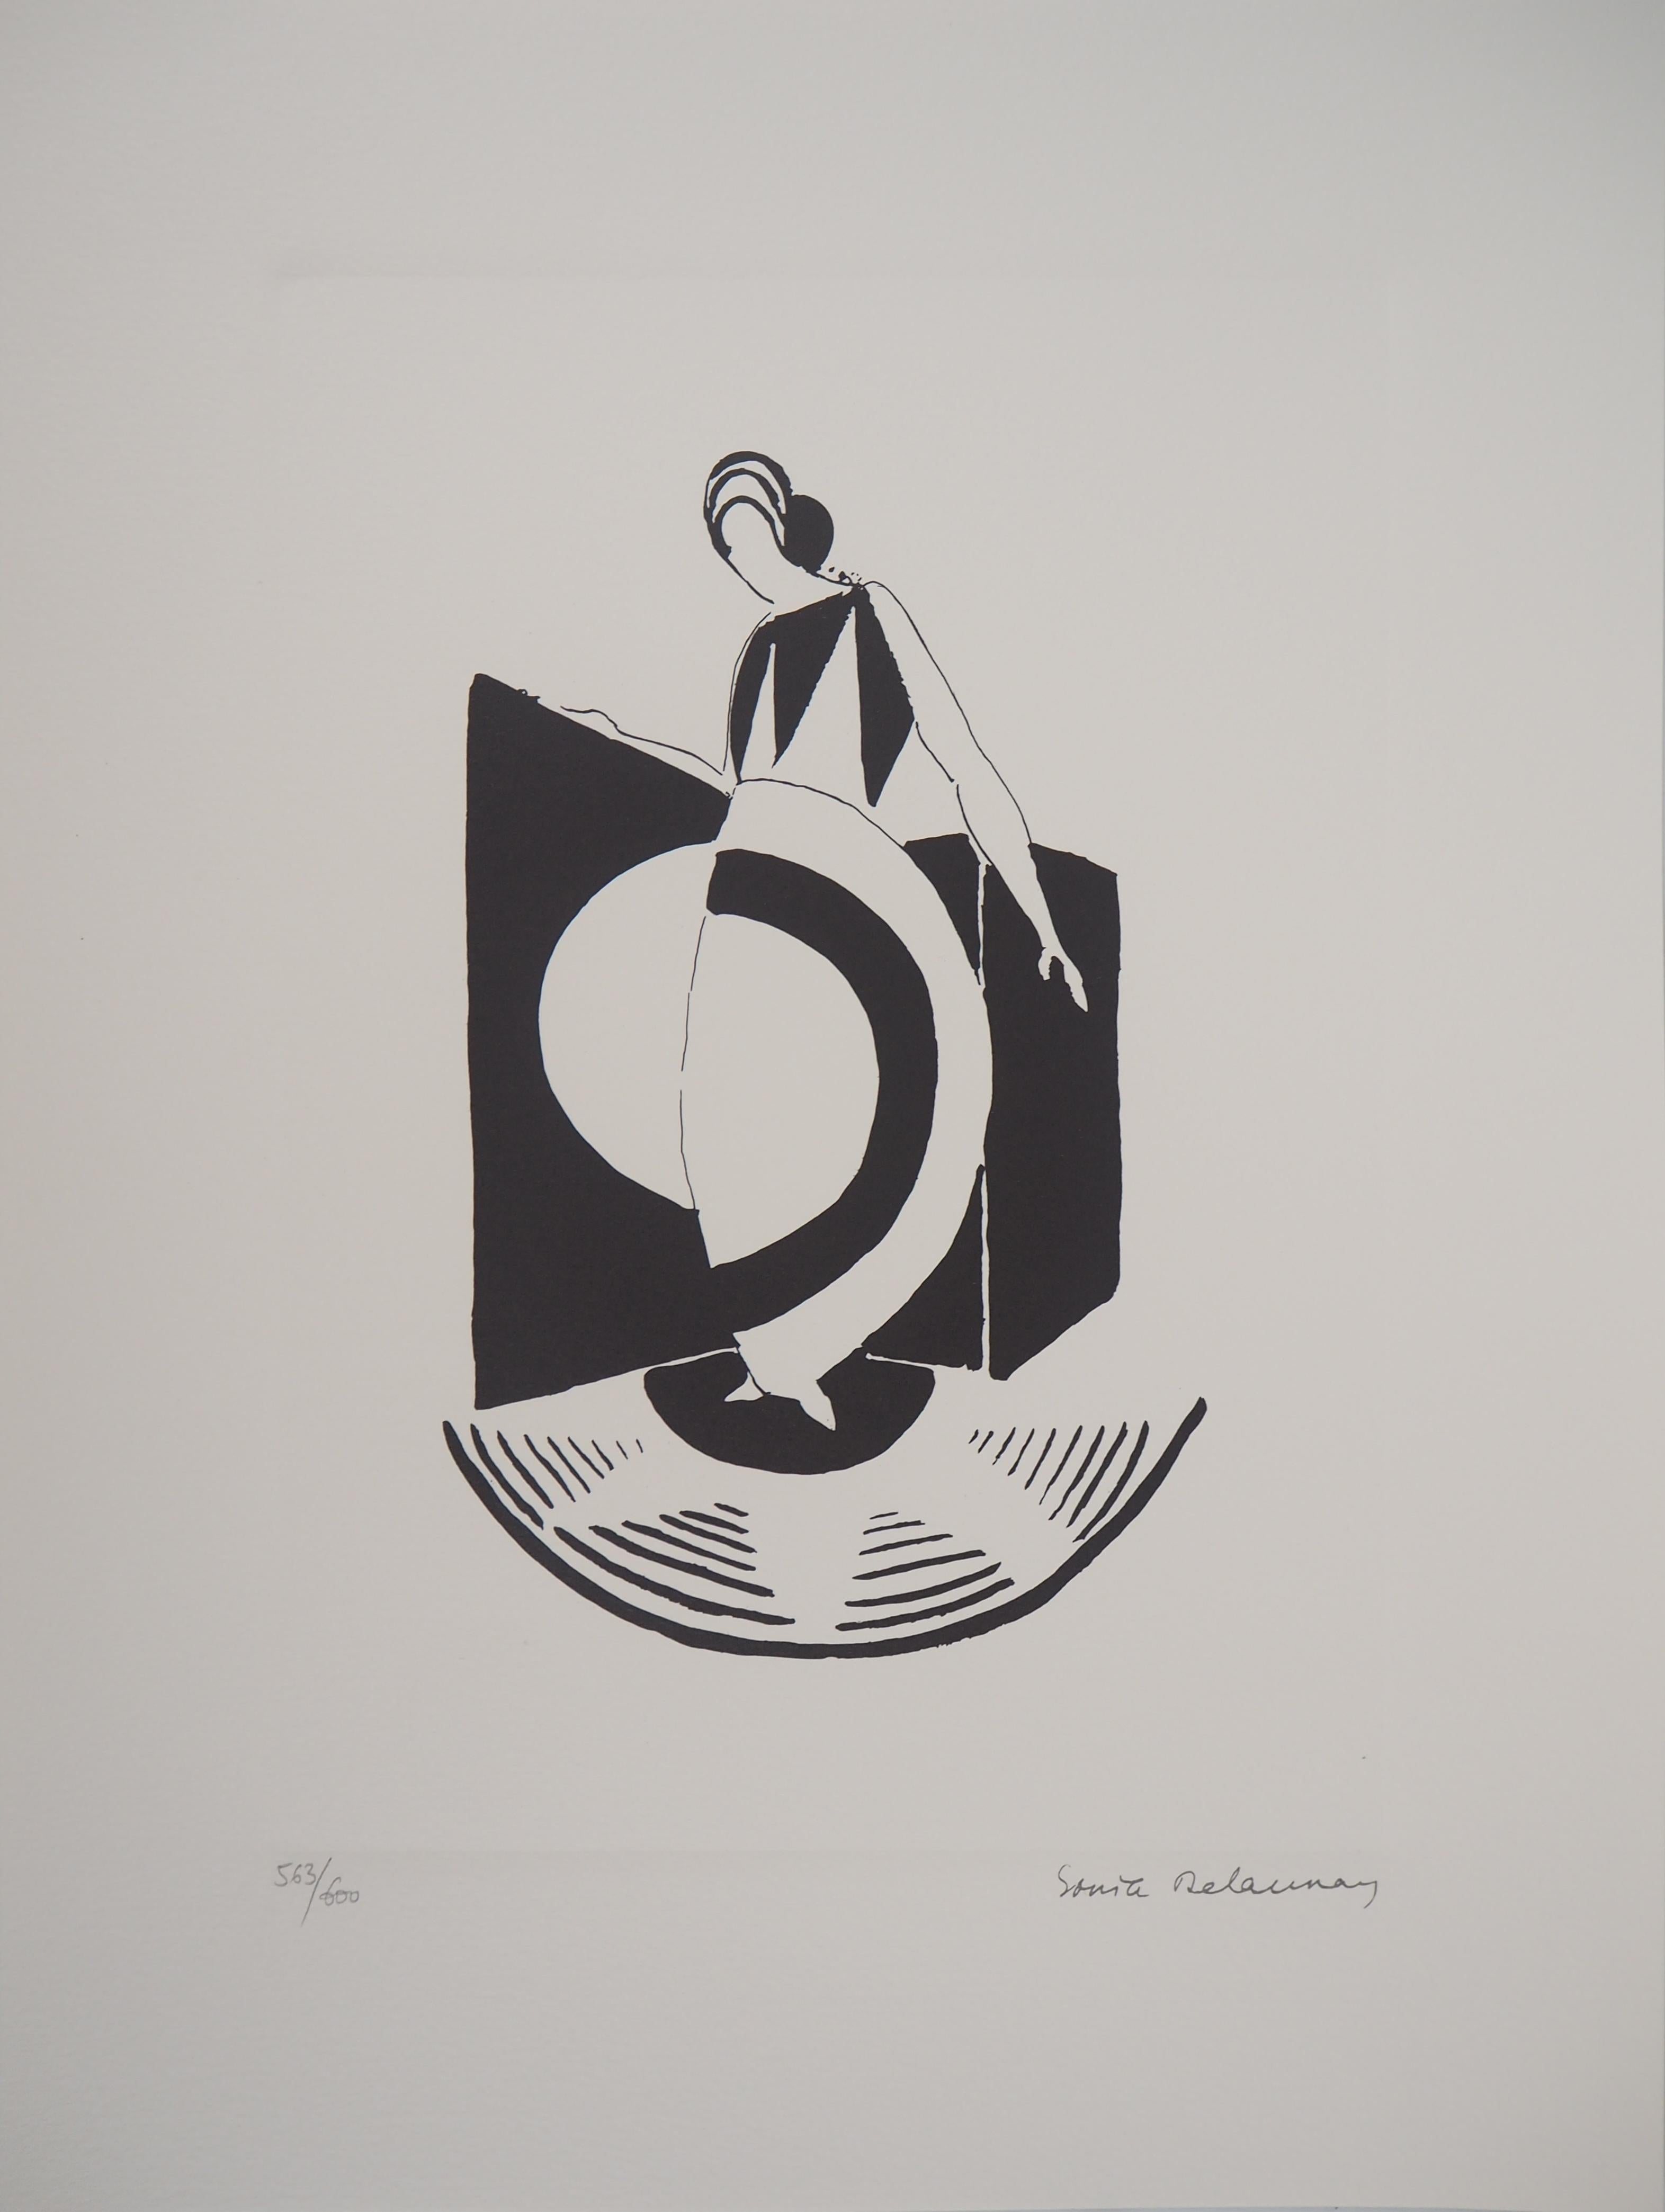 Sonia DELAUNAY
Woman with Art Deco Dress

Lithograph after a painting
Printed signature in the plate
Numbered /600 
On Arches vellum 40 x 30 cm (c. 15.7 x 11.8 in)
ArtCurial edition, 1994

Excellent condition